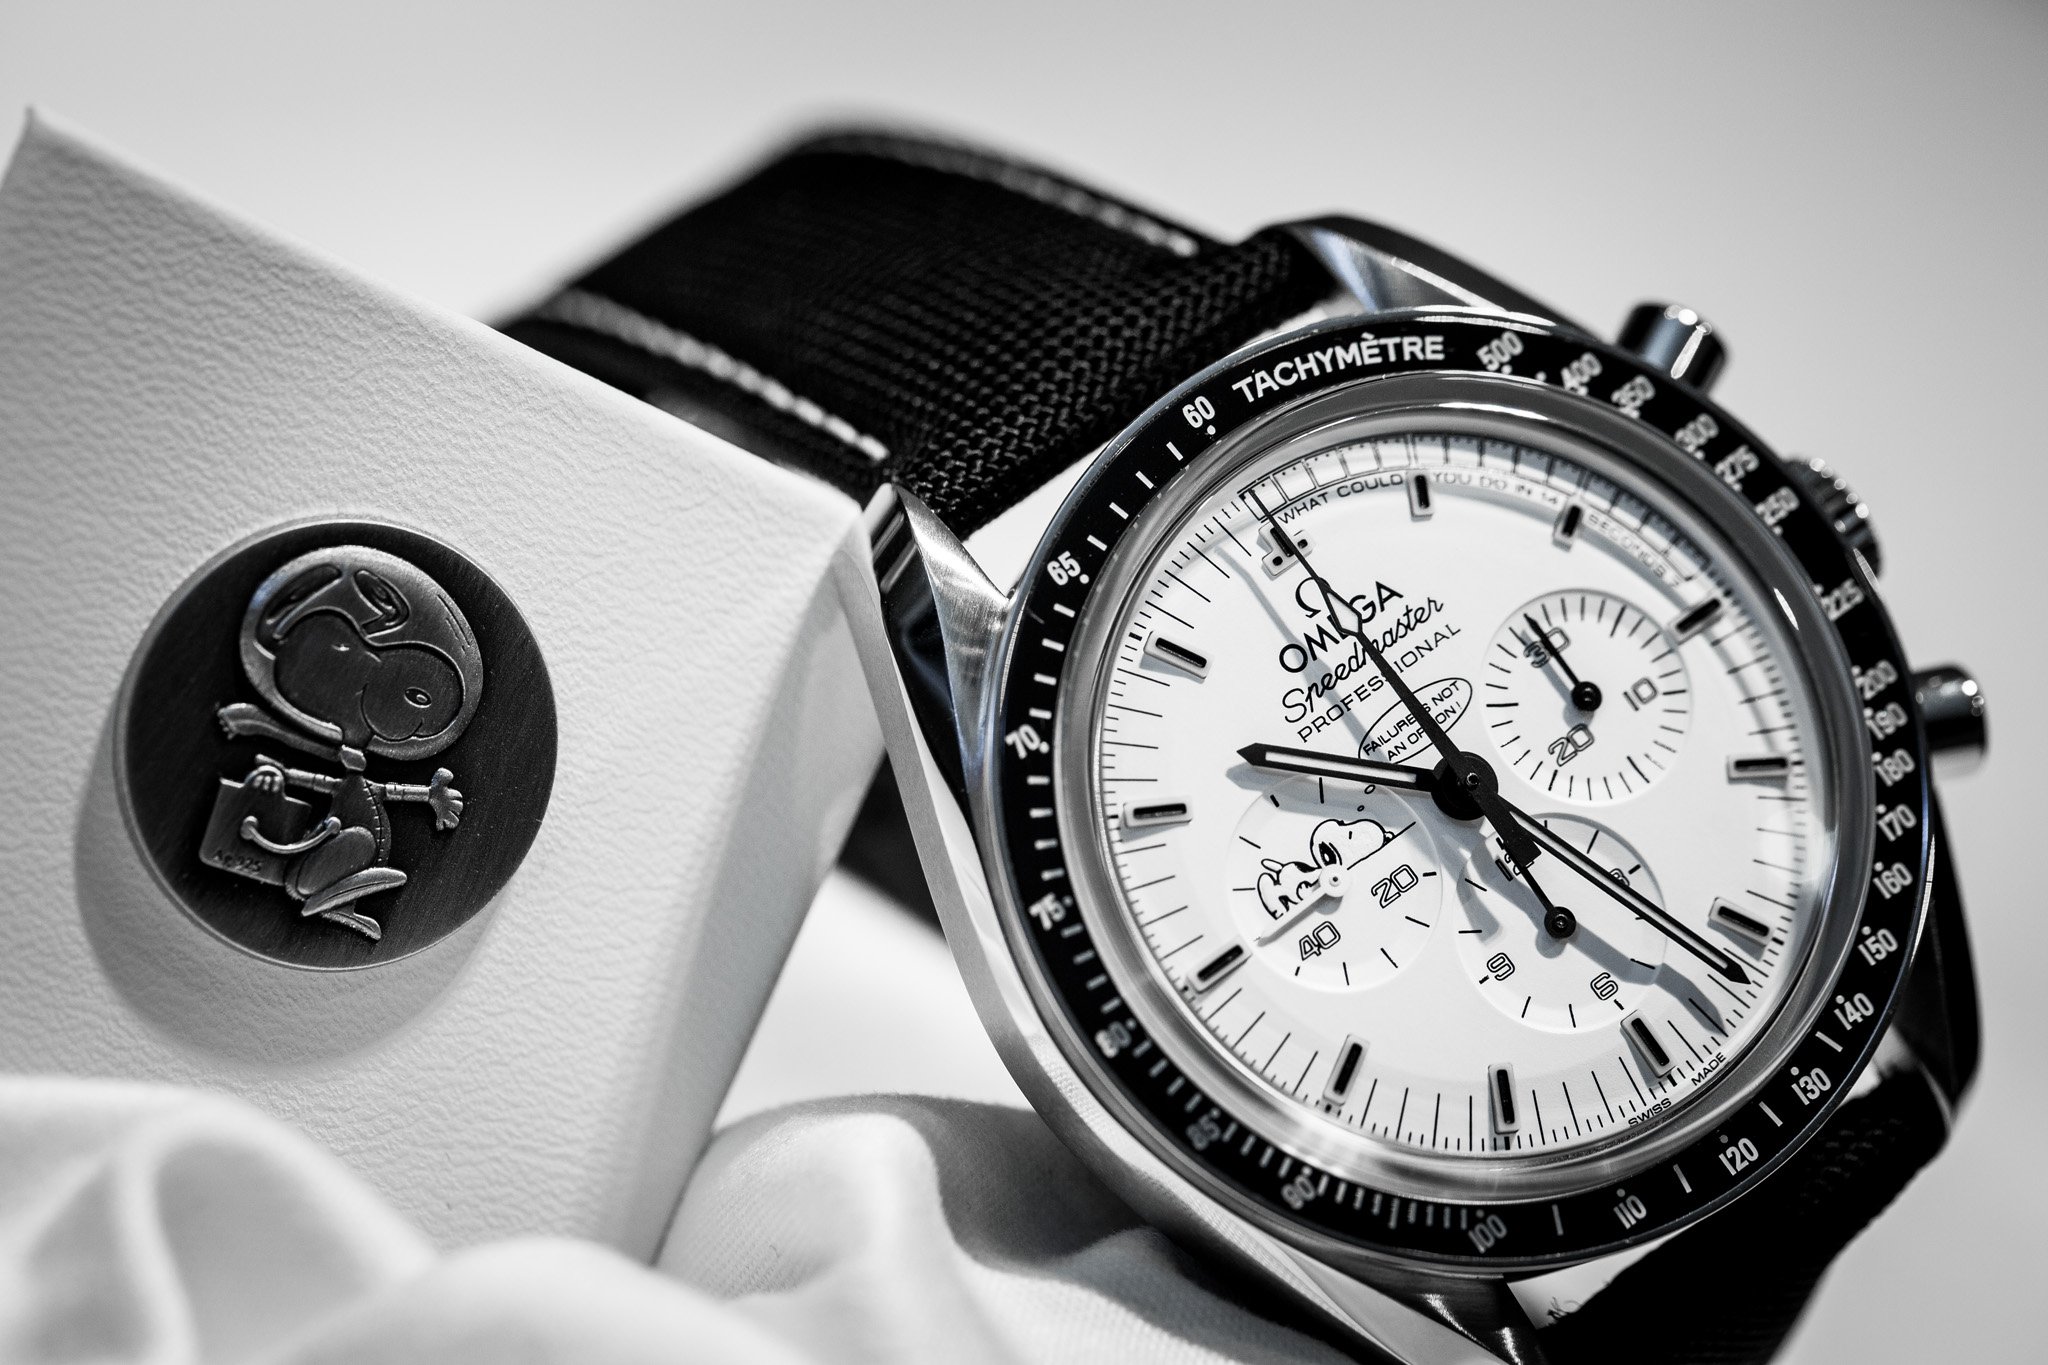 Omega Speedmaster Apollo 13 Silver Snoopy Award Limited Edition Watch